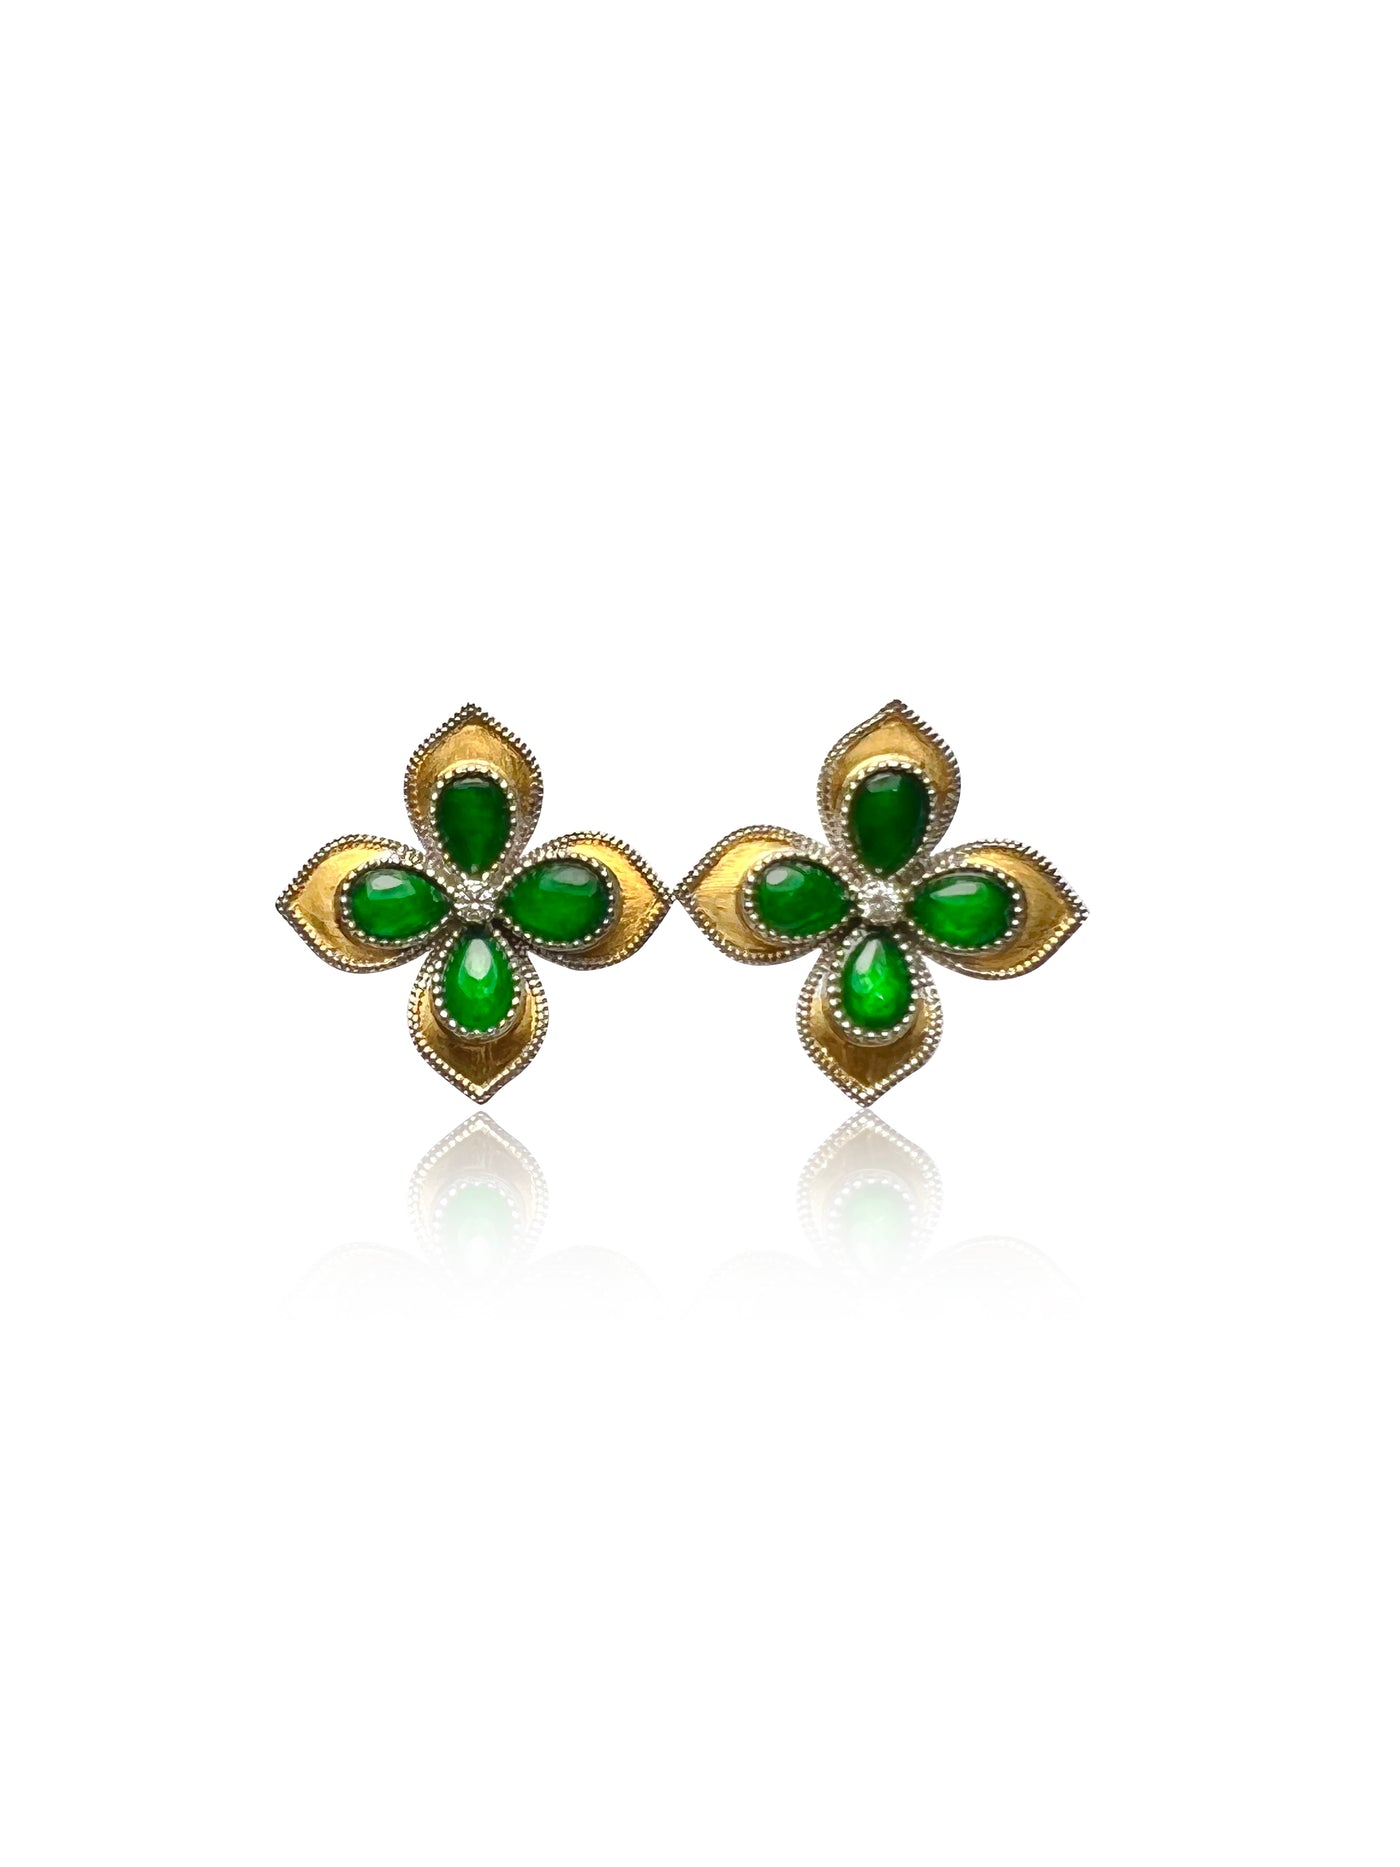 Jadeite Clovers Earrings in 18K Yellow Gold and Diamonds